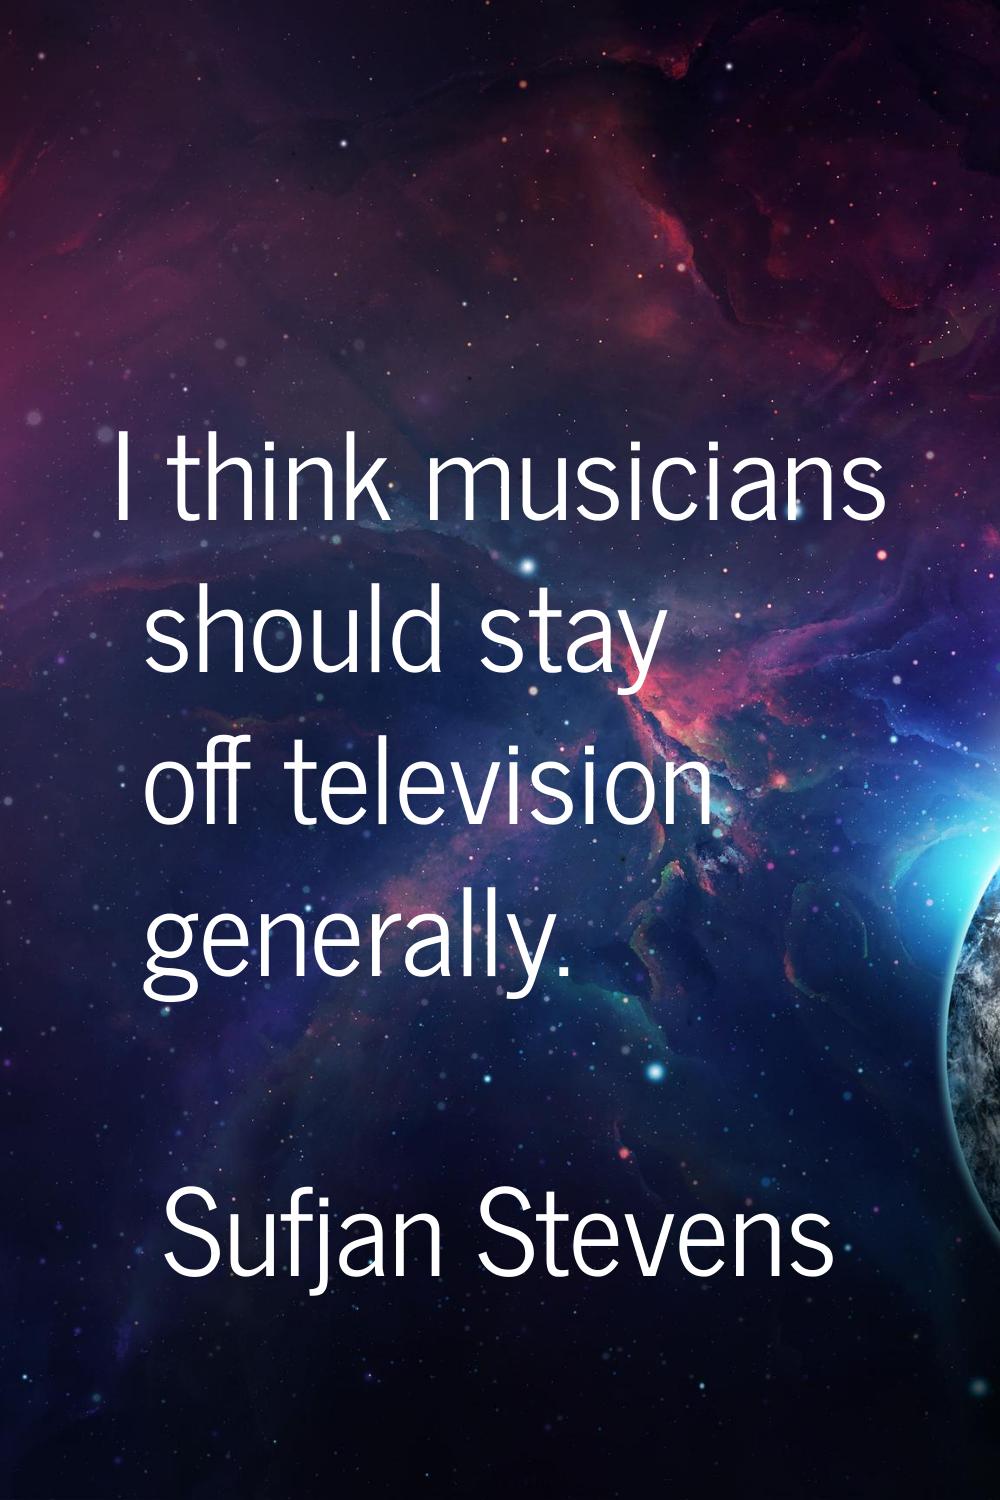 I think musicians should stay off television generally.